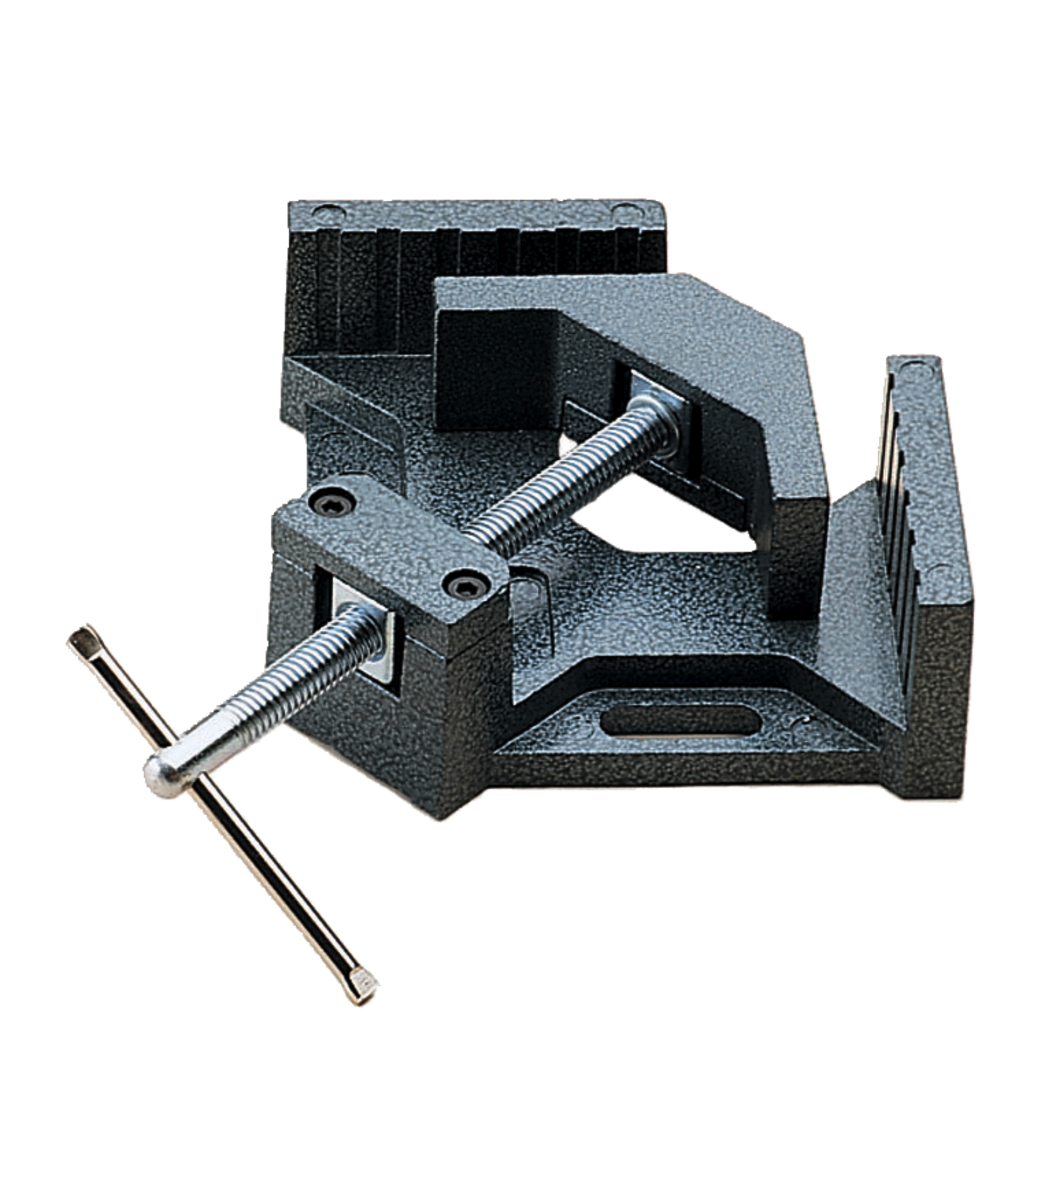 AC-324, 90° Angle Clamp, 4" Throat, 2-3/4" Miter Capacity, 1-3/8" Jaw Height, 2-1/4" Jaw Length